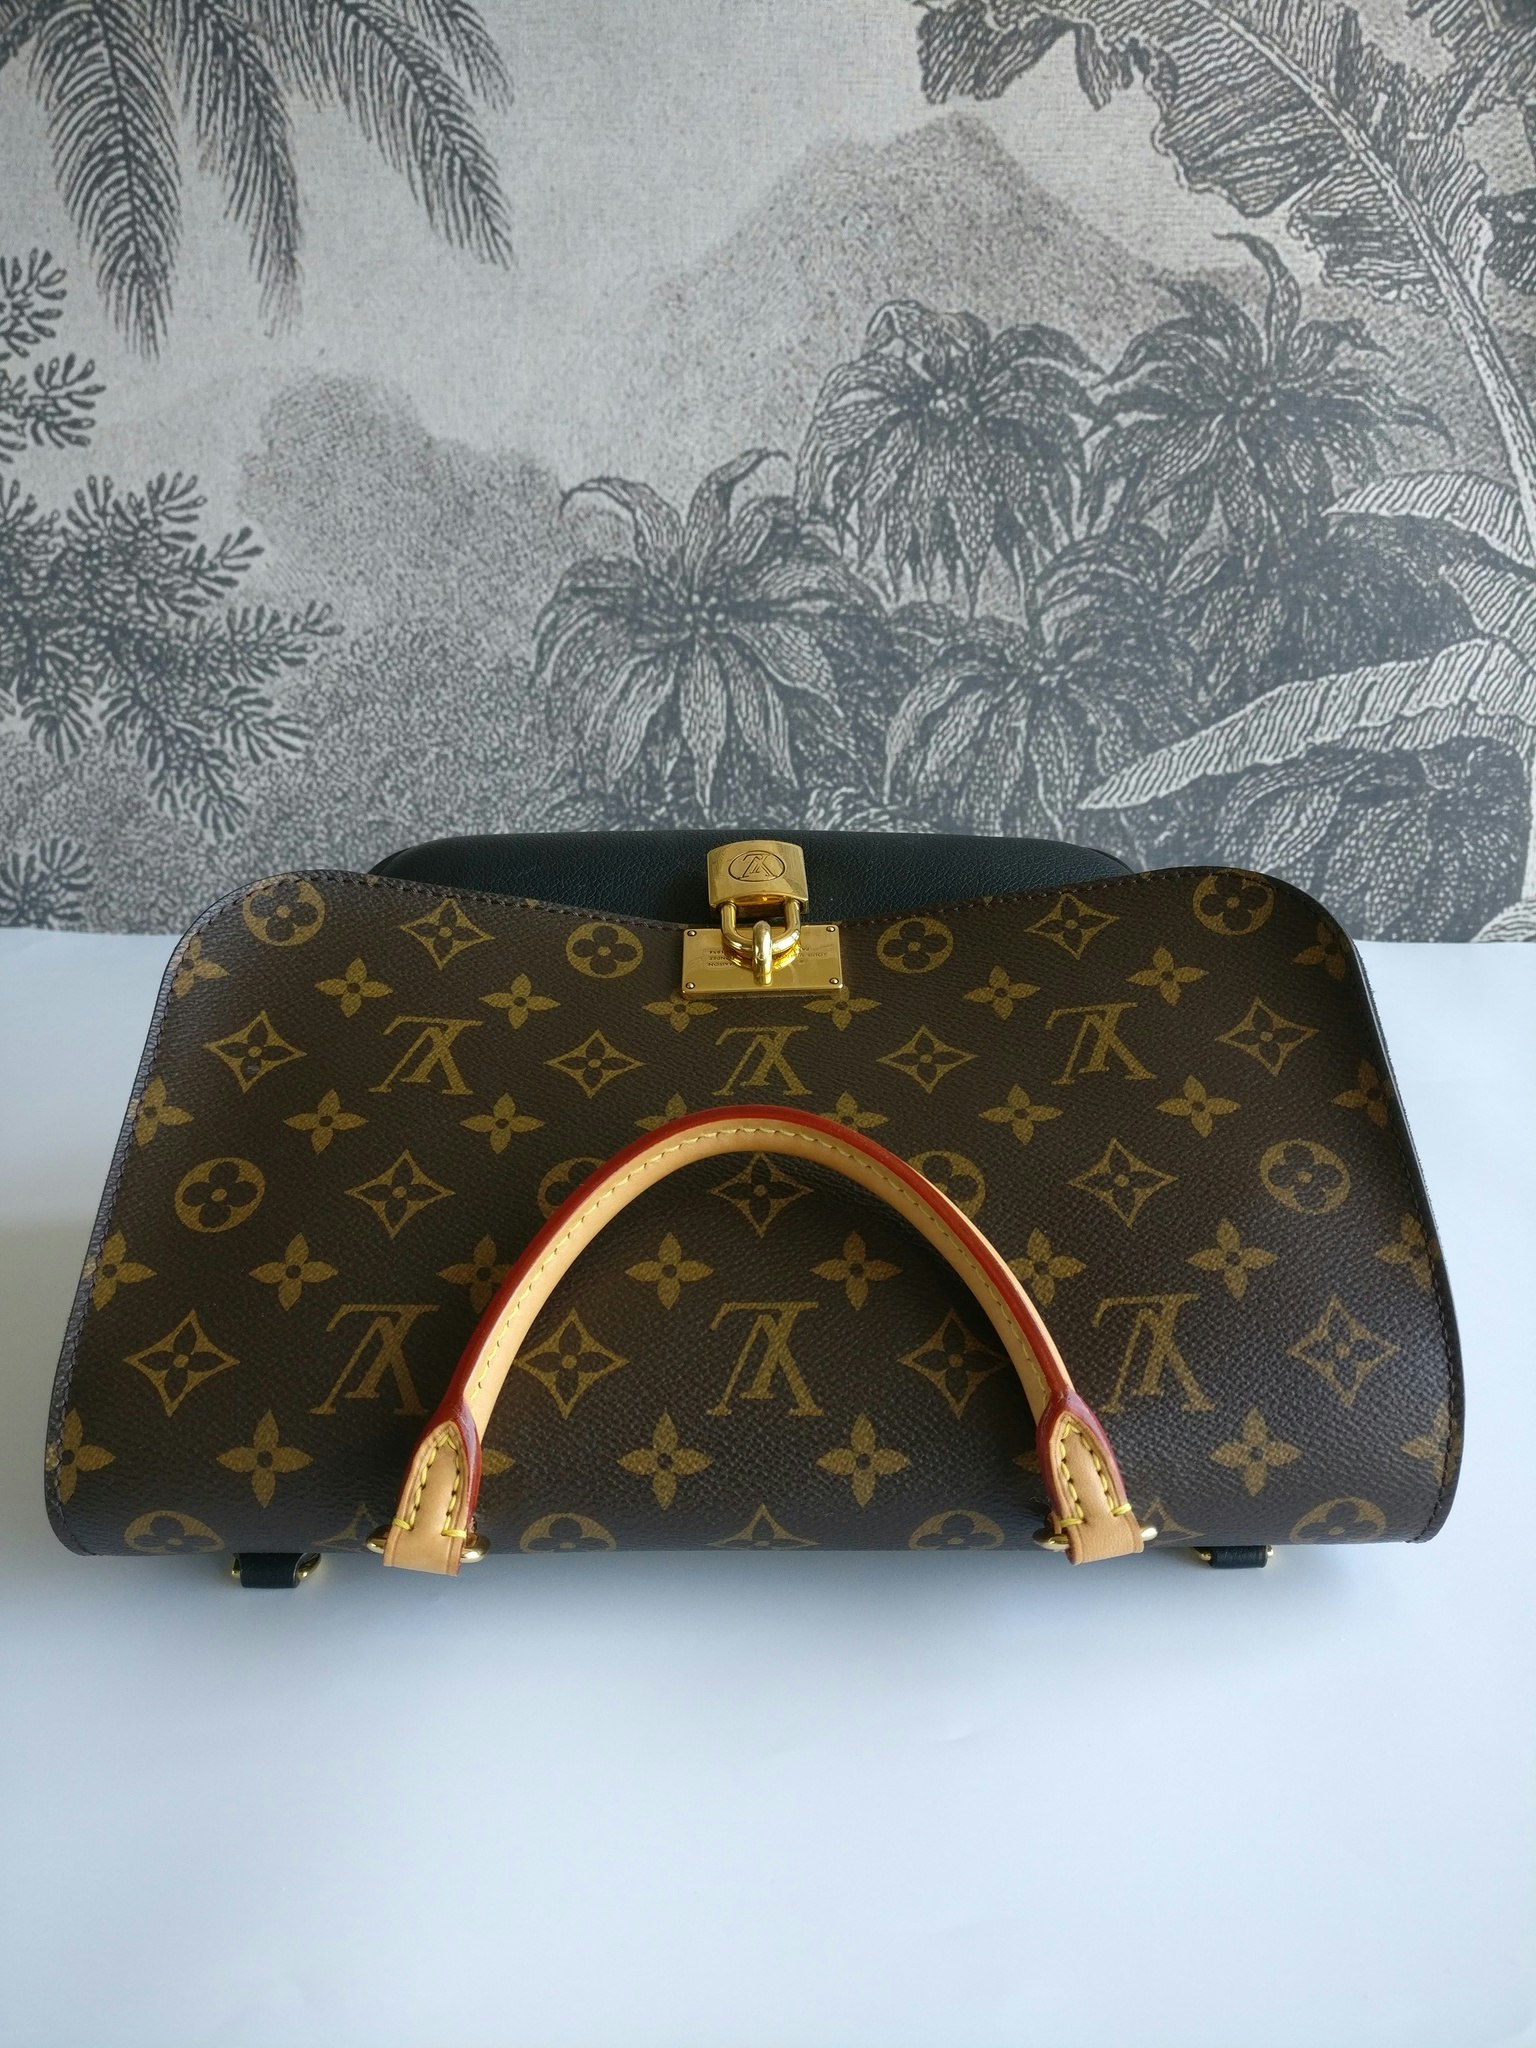 Louis Vuitton Marignan Monogram Canvas Bag 👢👑 Product Code : 287^ Please  contact me for your orders and questions via Whatsapp(+905060246175, +44  7561389919) …